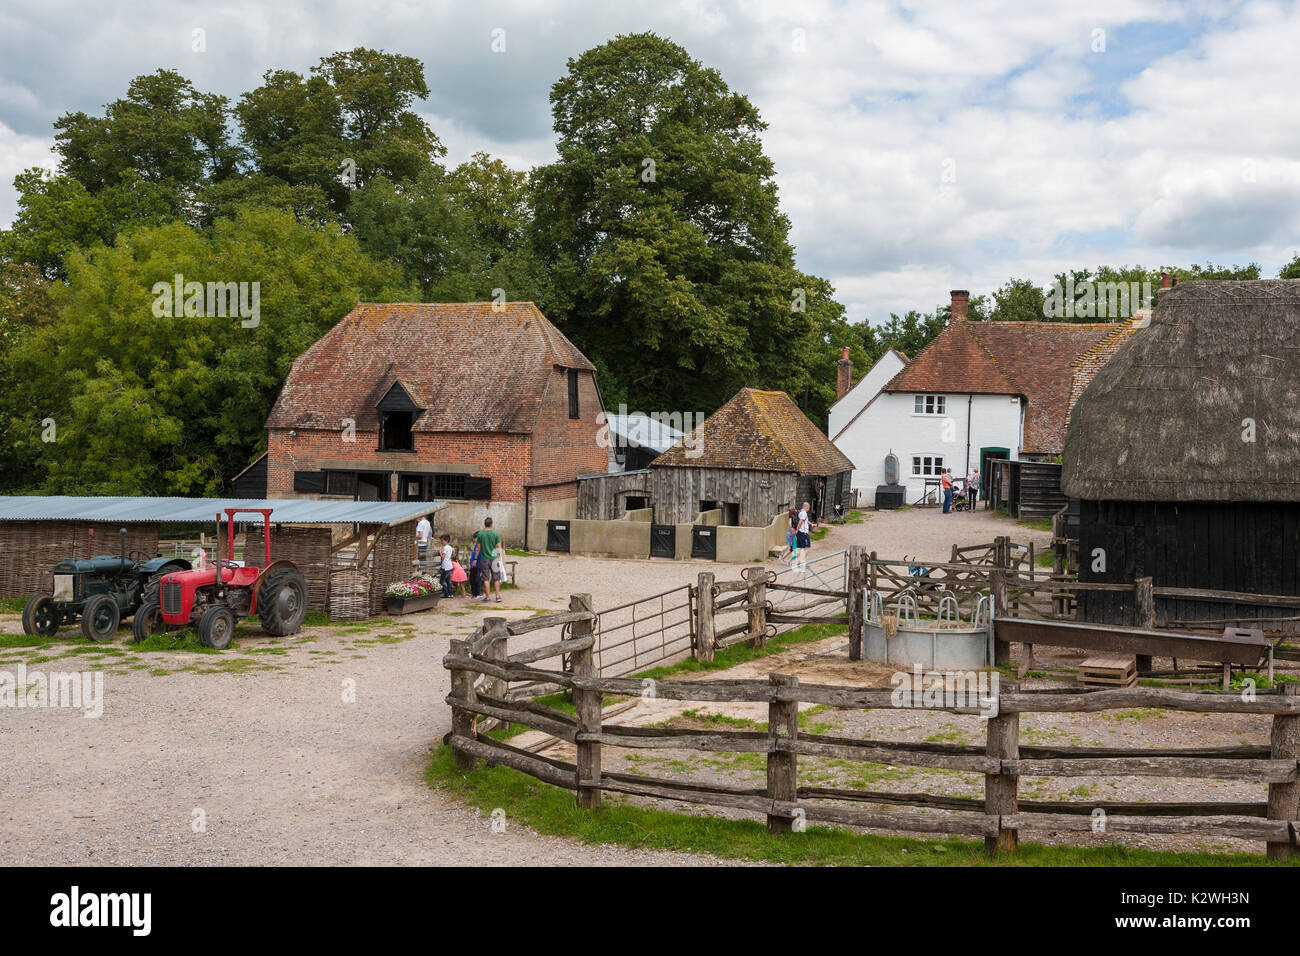 The farmyard at Manor Farm, Bursledon, Hampshire, England, which featured in the recent BBC2 series 'Wartime Farm' Stock Photo